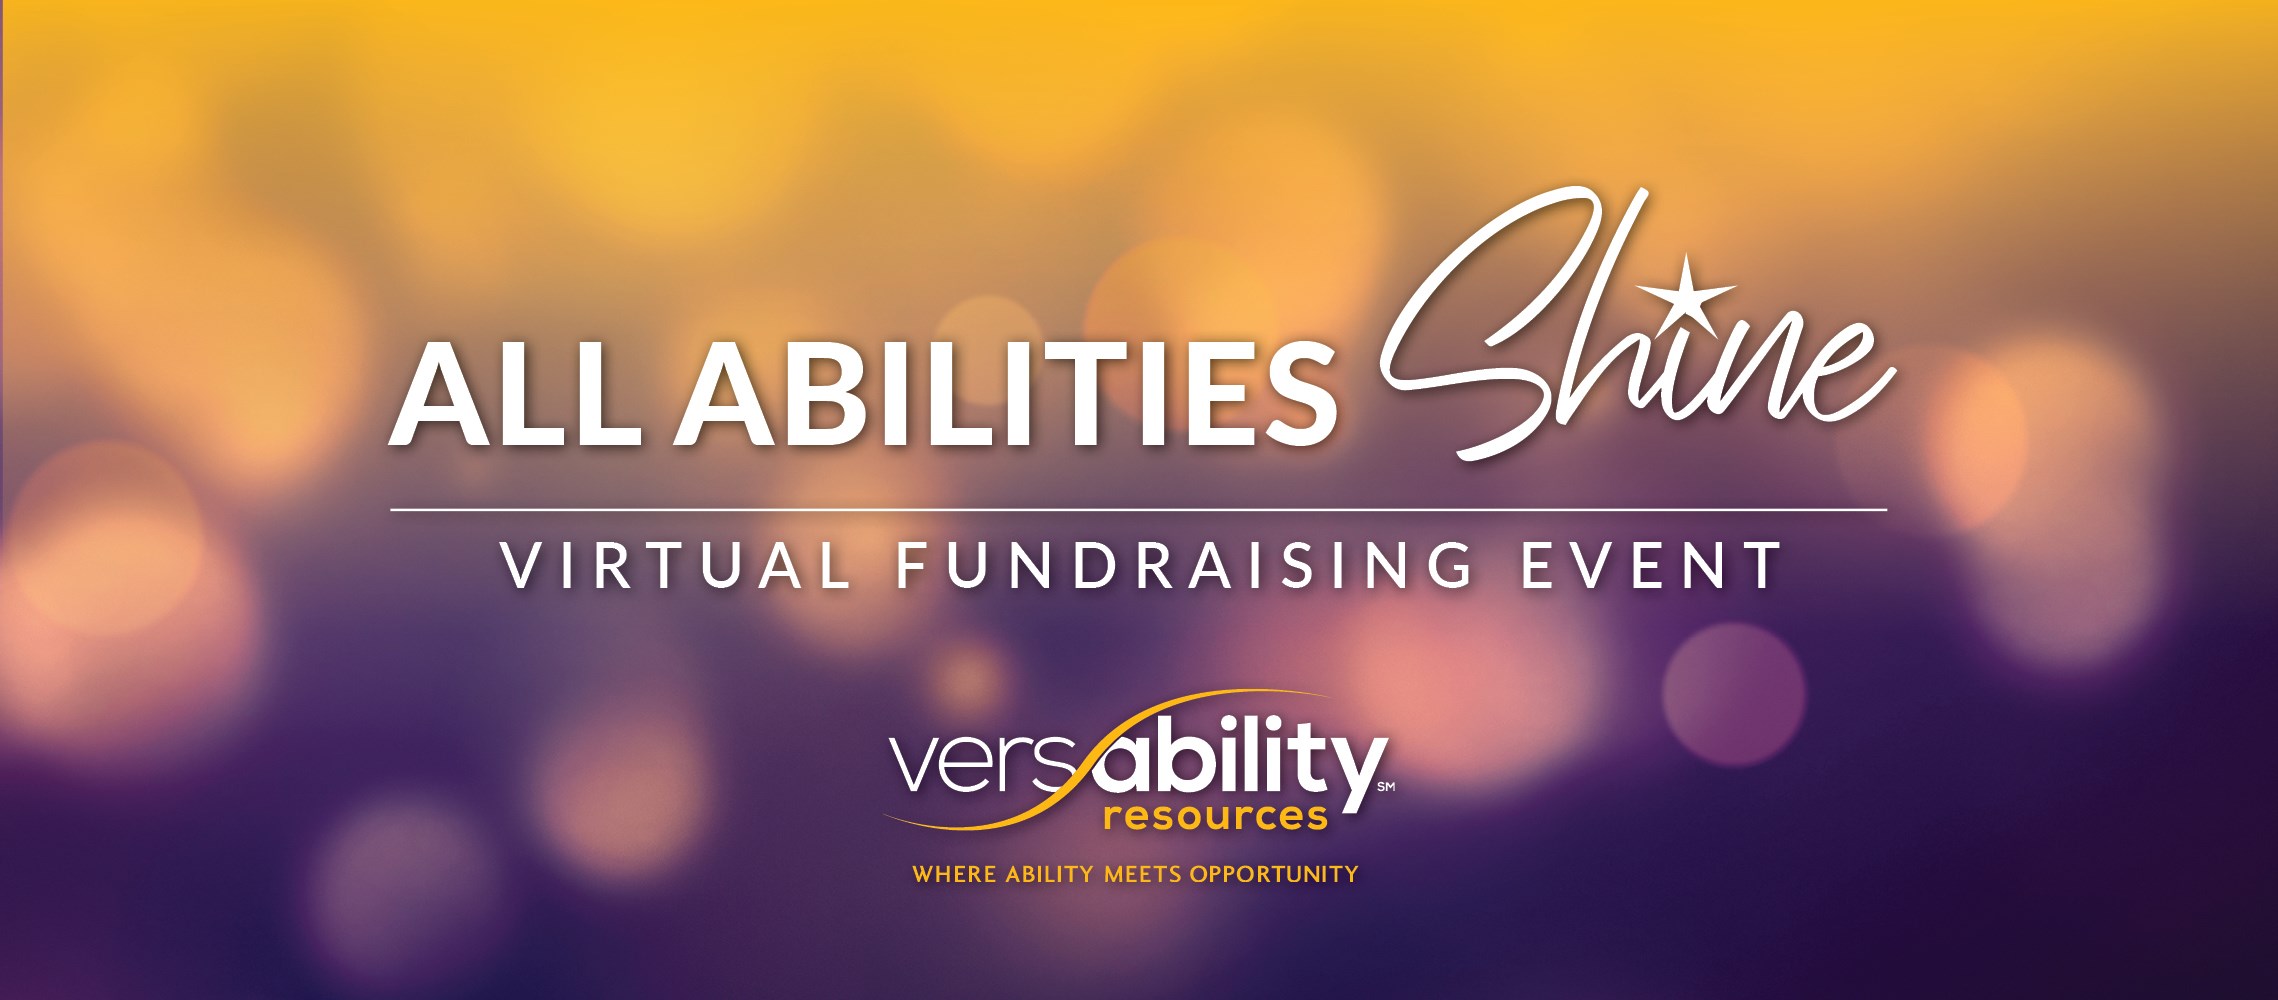 VersAbility Resources Raises $60,000 for People with Disabilities at Annual Gala, Held Virtually in March